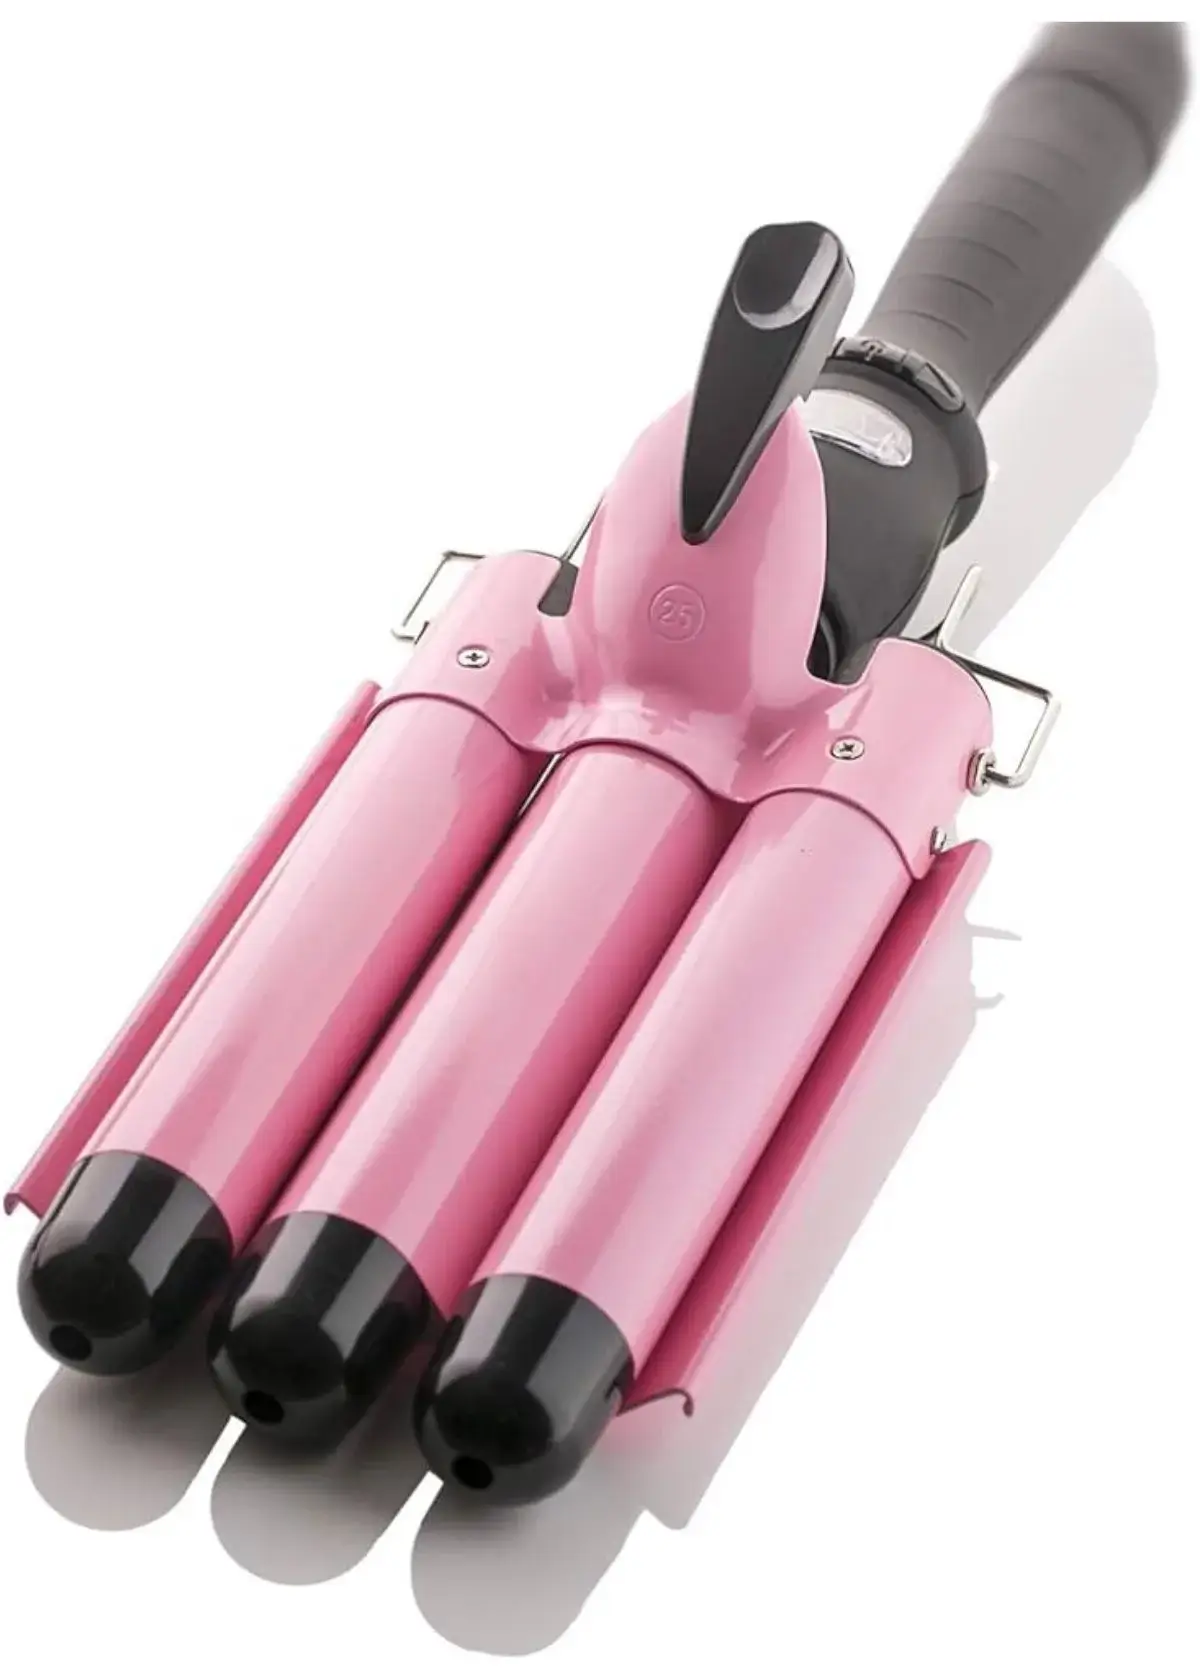 How to choose the right triple-barrel curling iron?